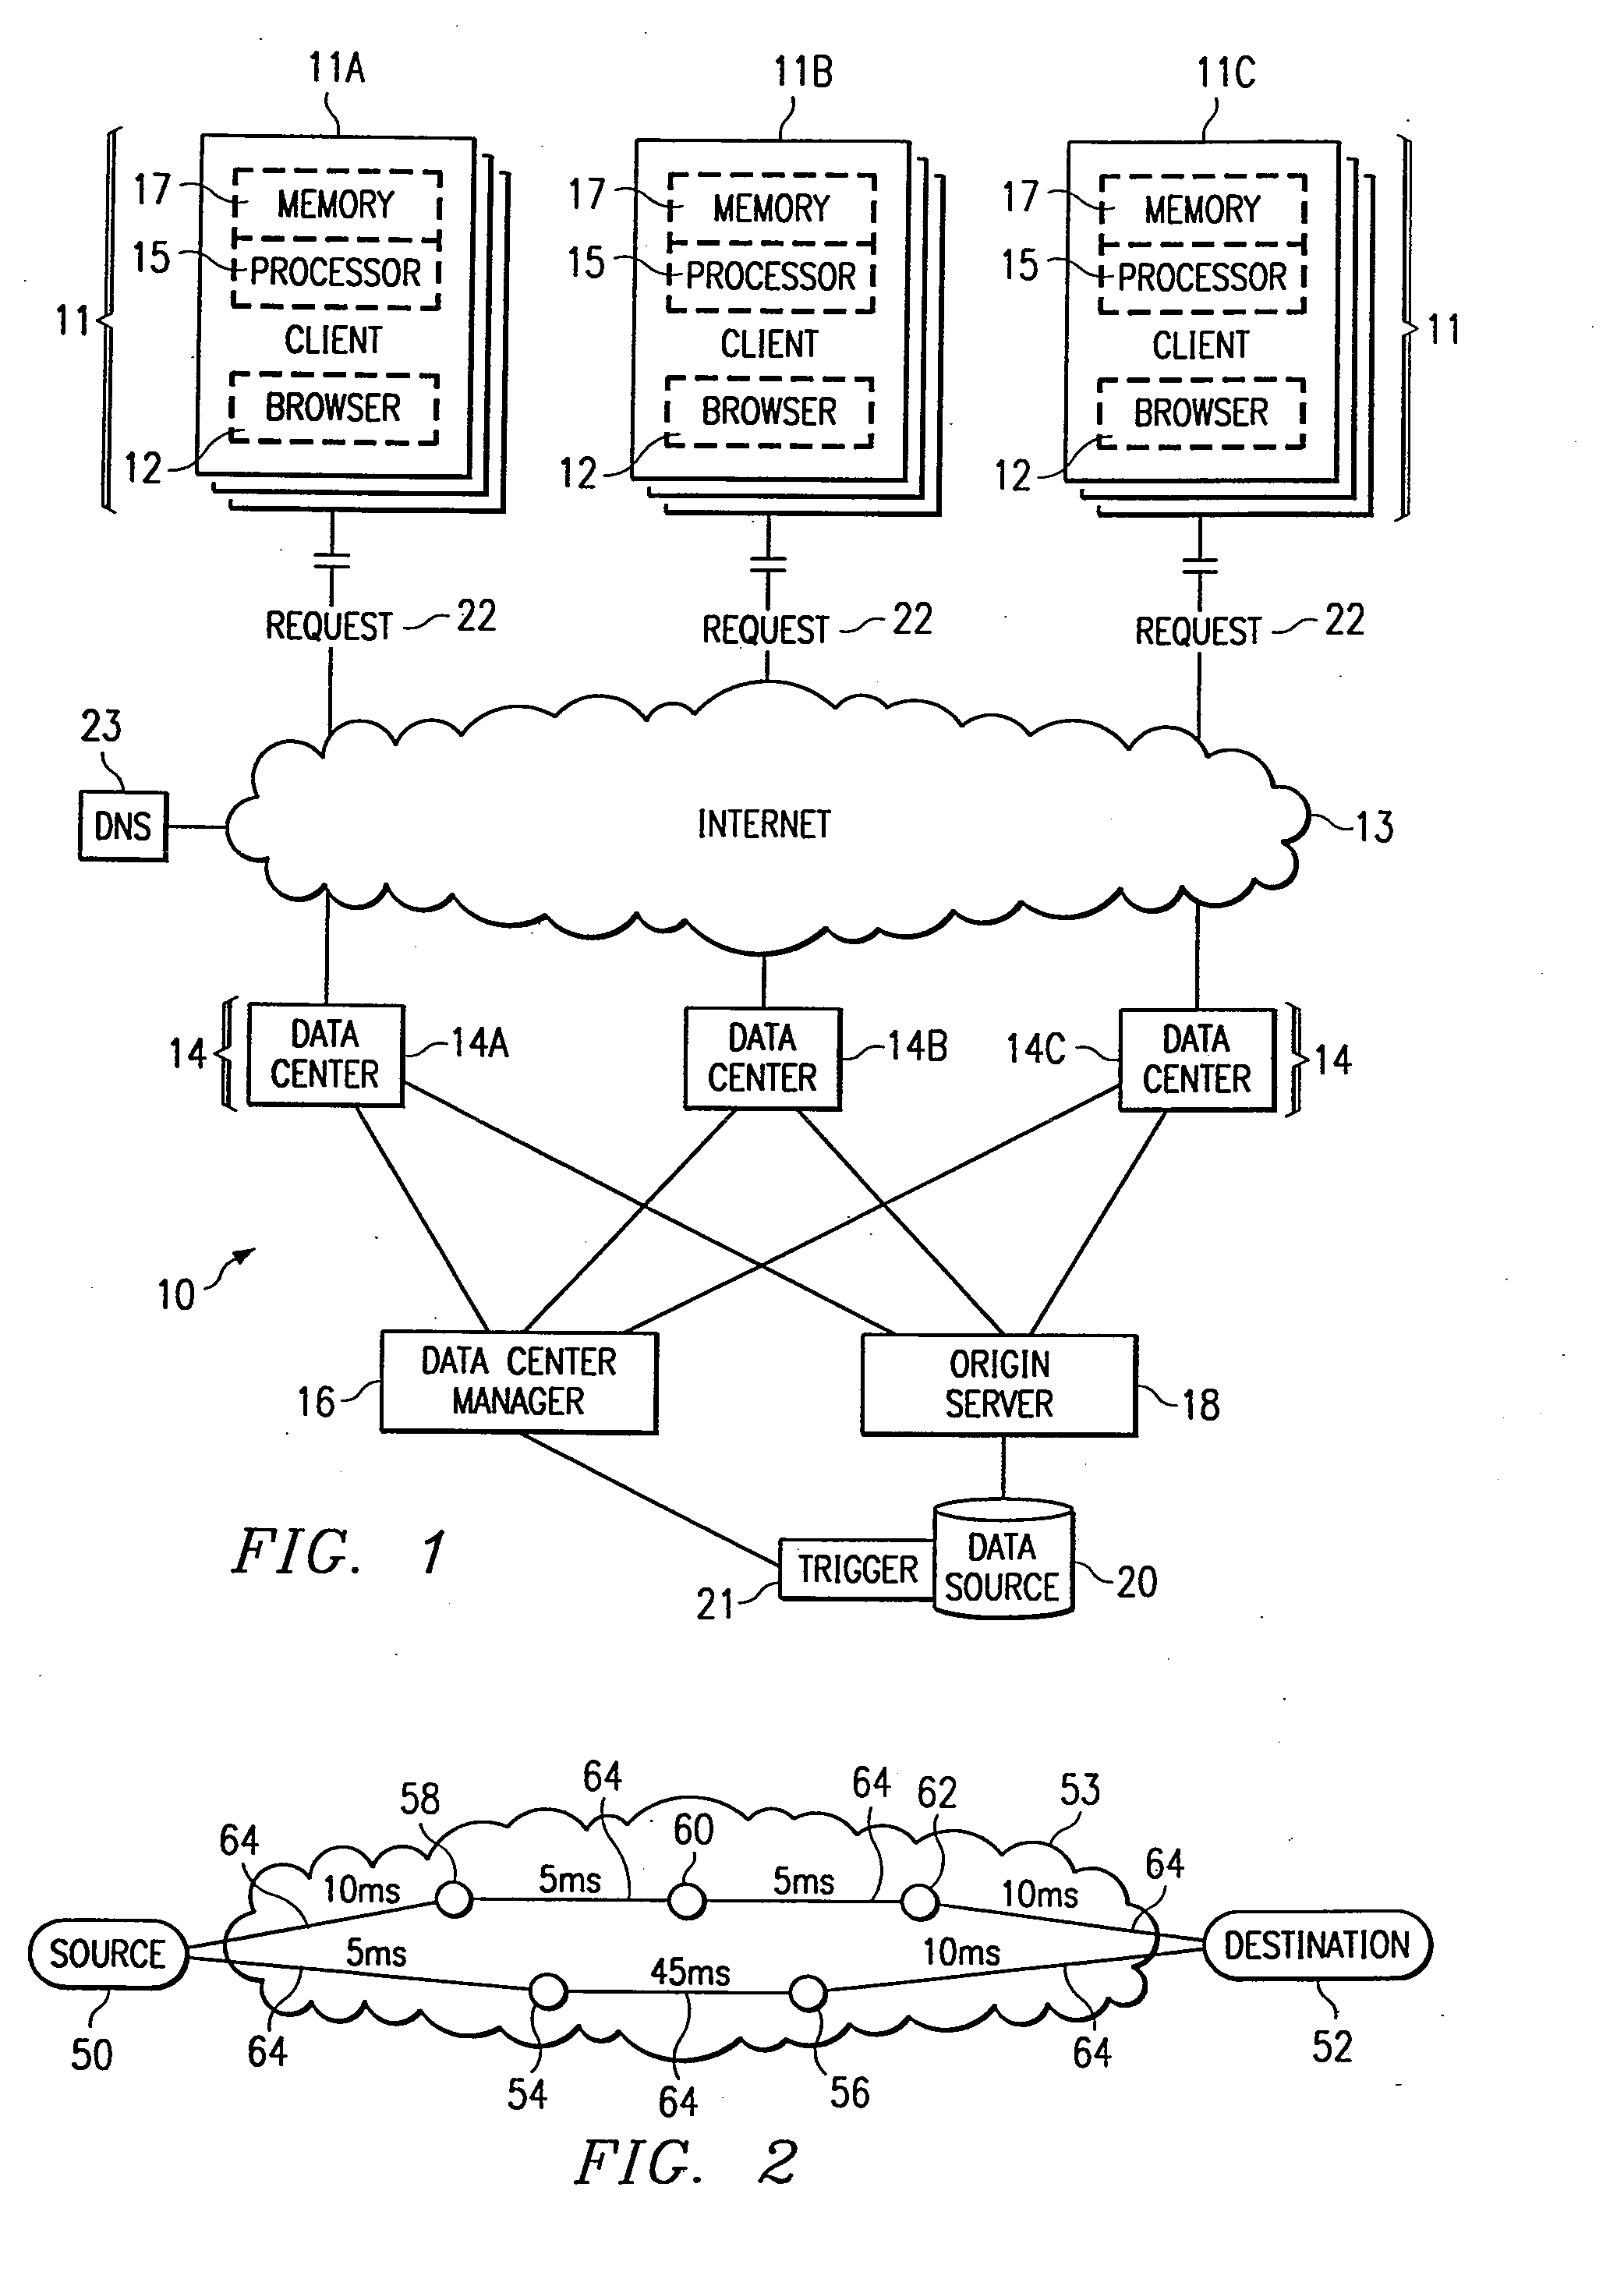 Method and Apparatus for Dynamic Data Flow Control Using Prioritization of Data Requests